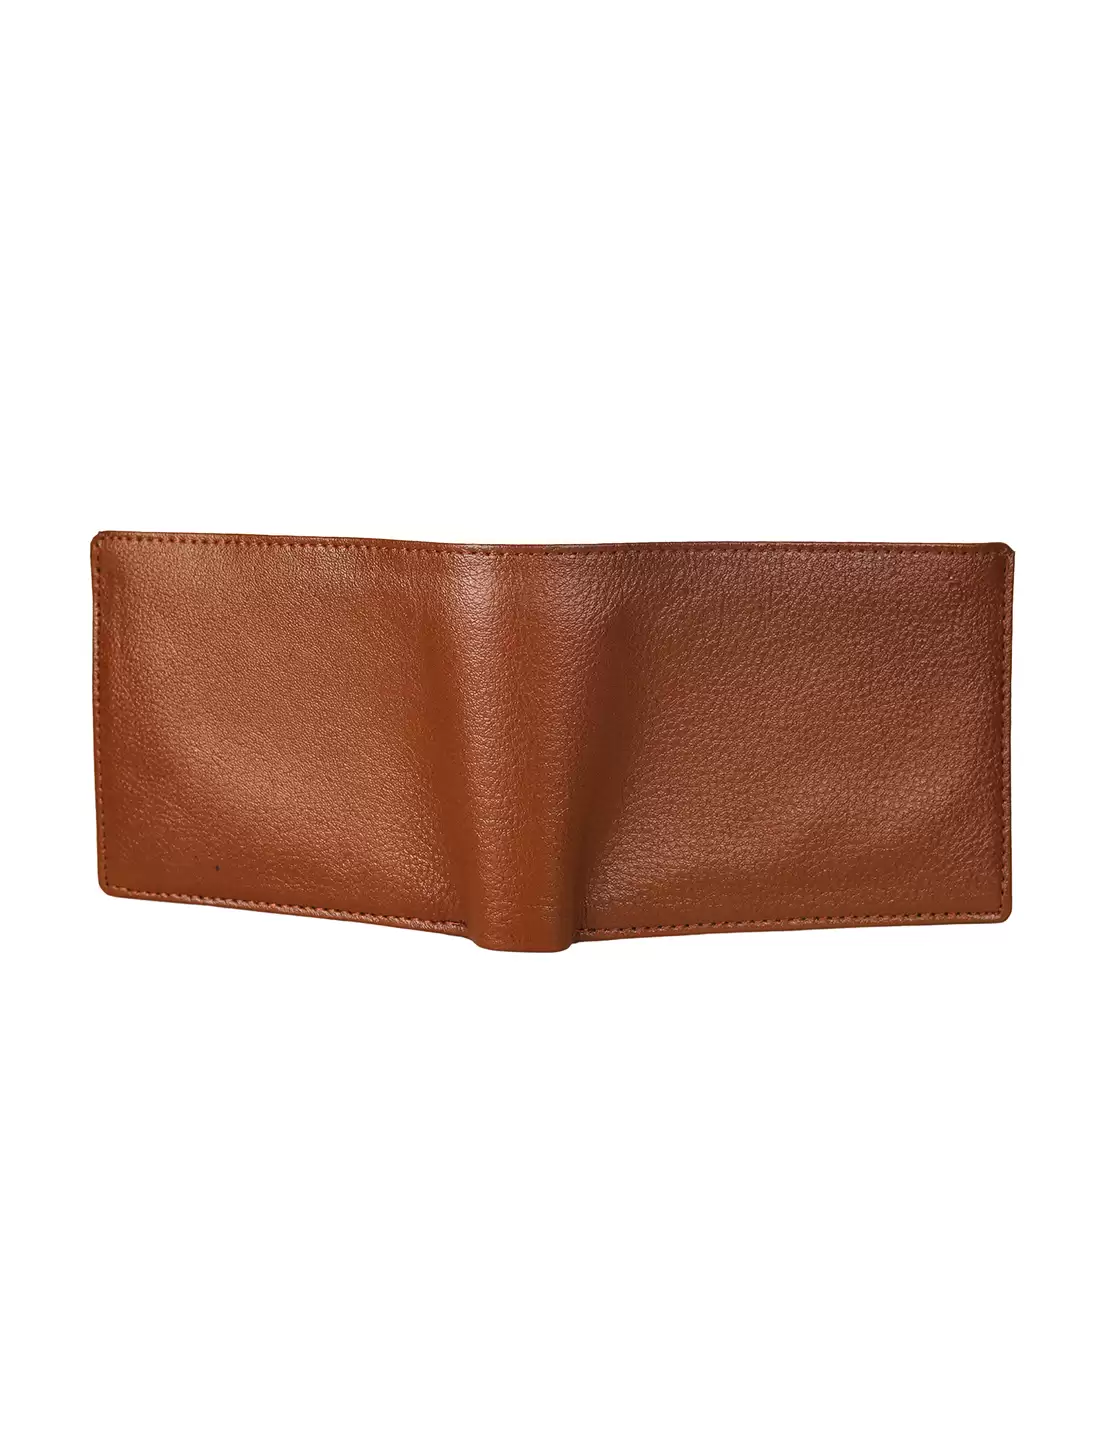 MOON PU Leather Gents Purse Man Wallet, 2 at Rs 60 in Kozhikode | ID:  2851915207762